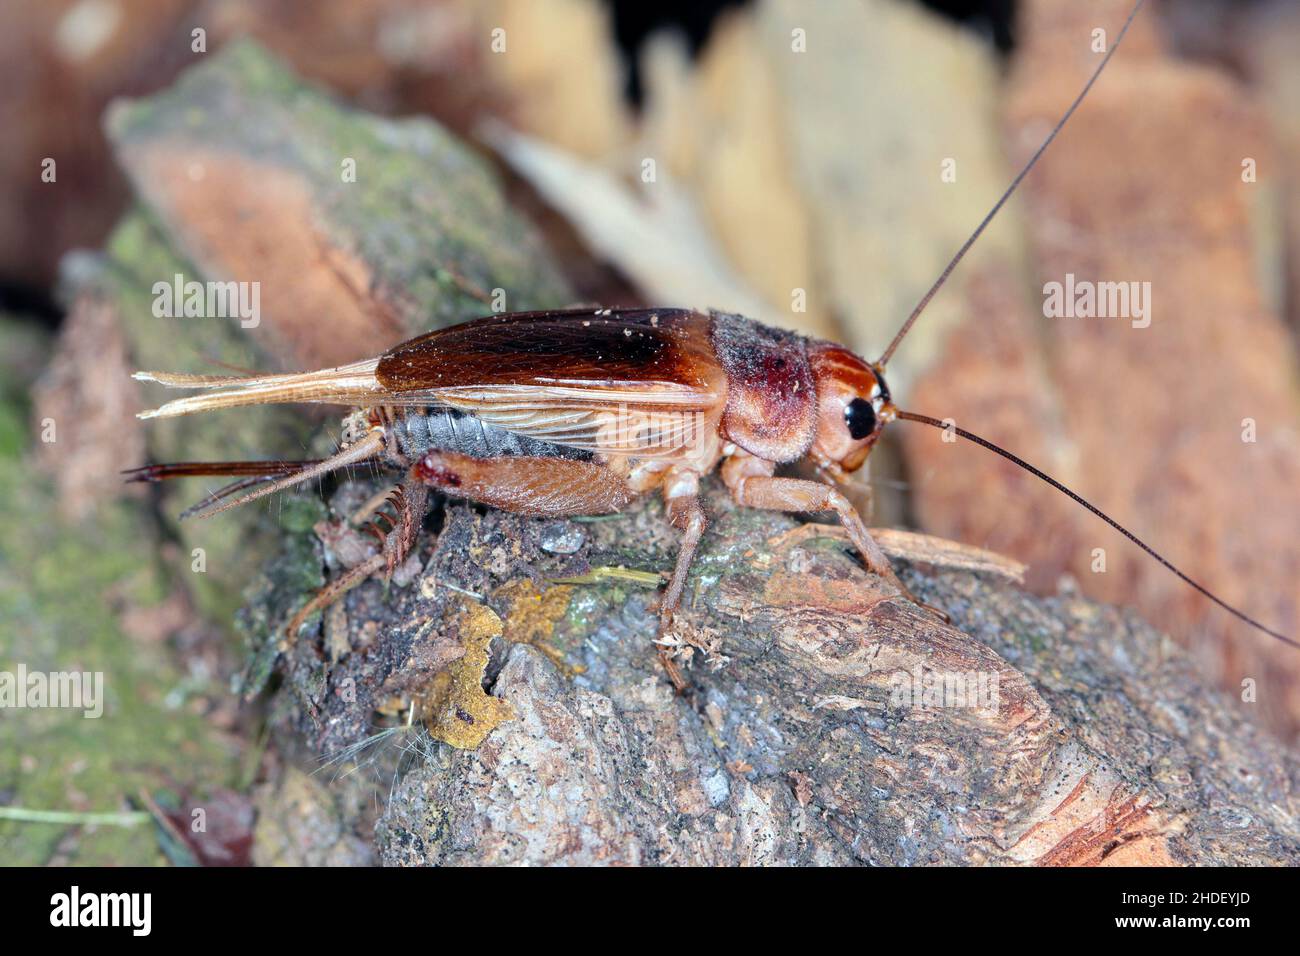 Close up House cricket (Acheta domestica). Eat bugs and eating insects as exotic cuisine and alternative high protein nutrition food as a cricket. Stock Photo